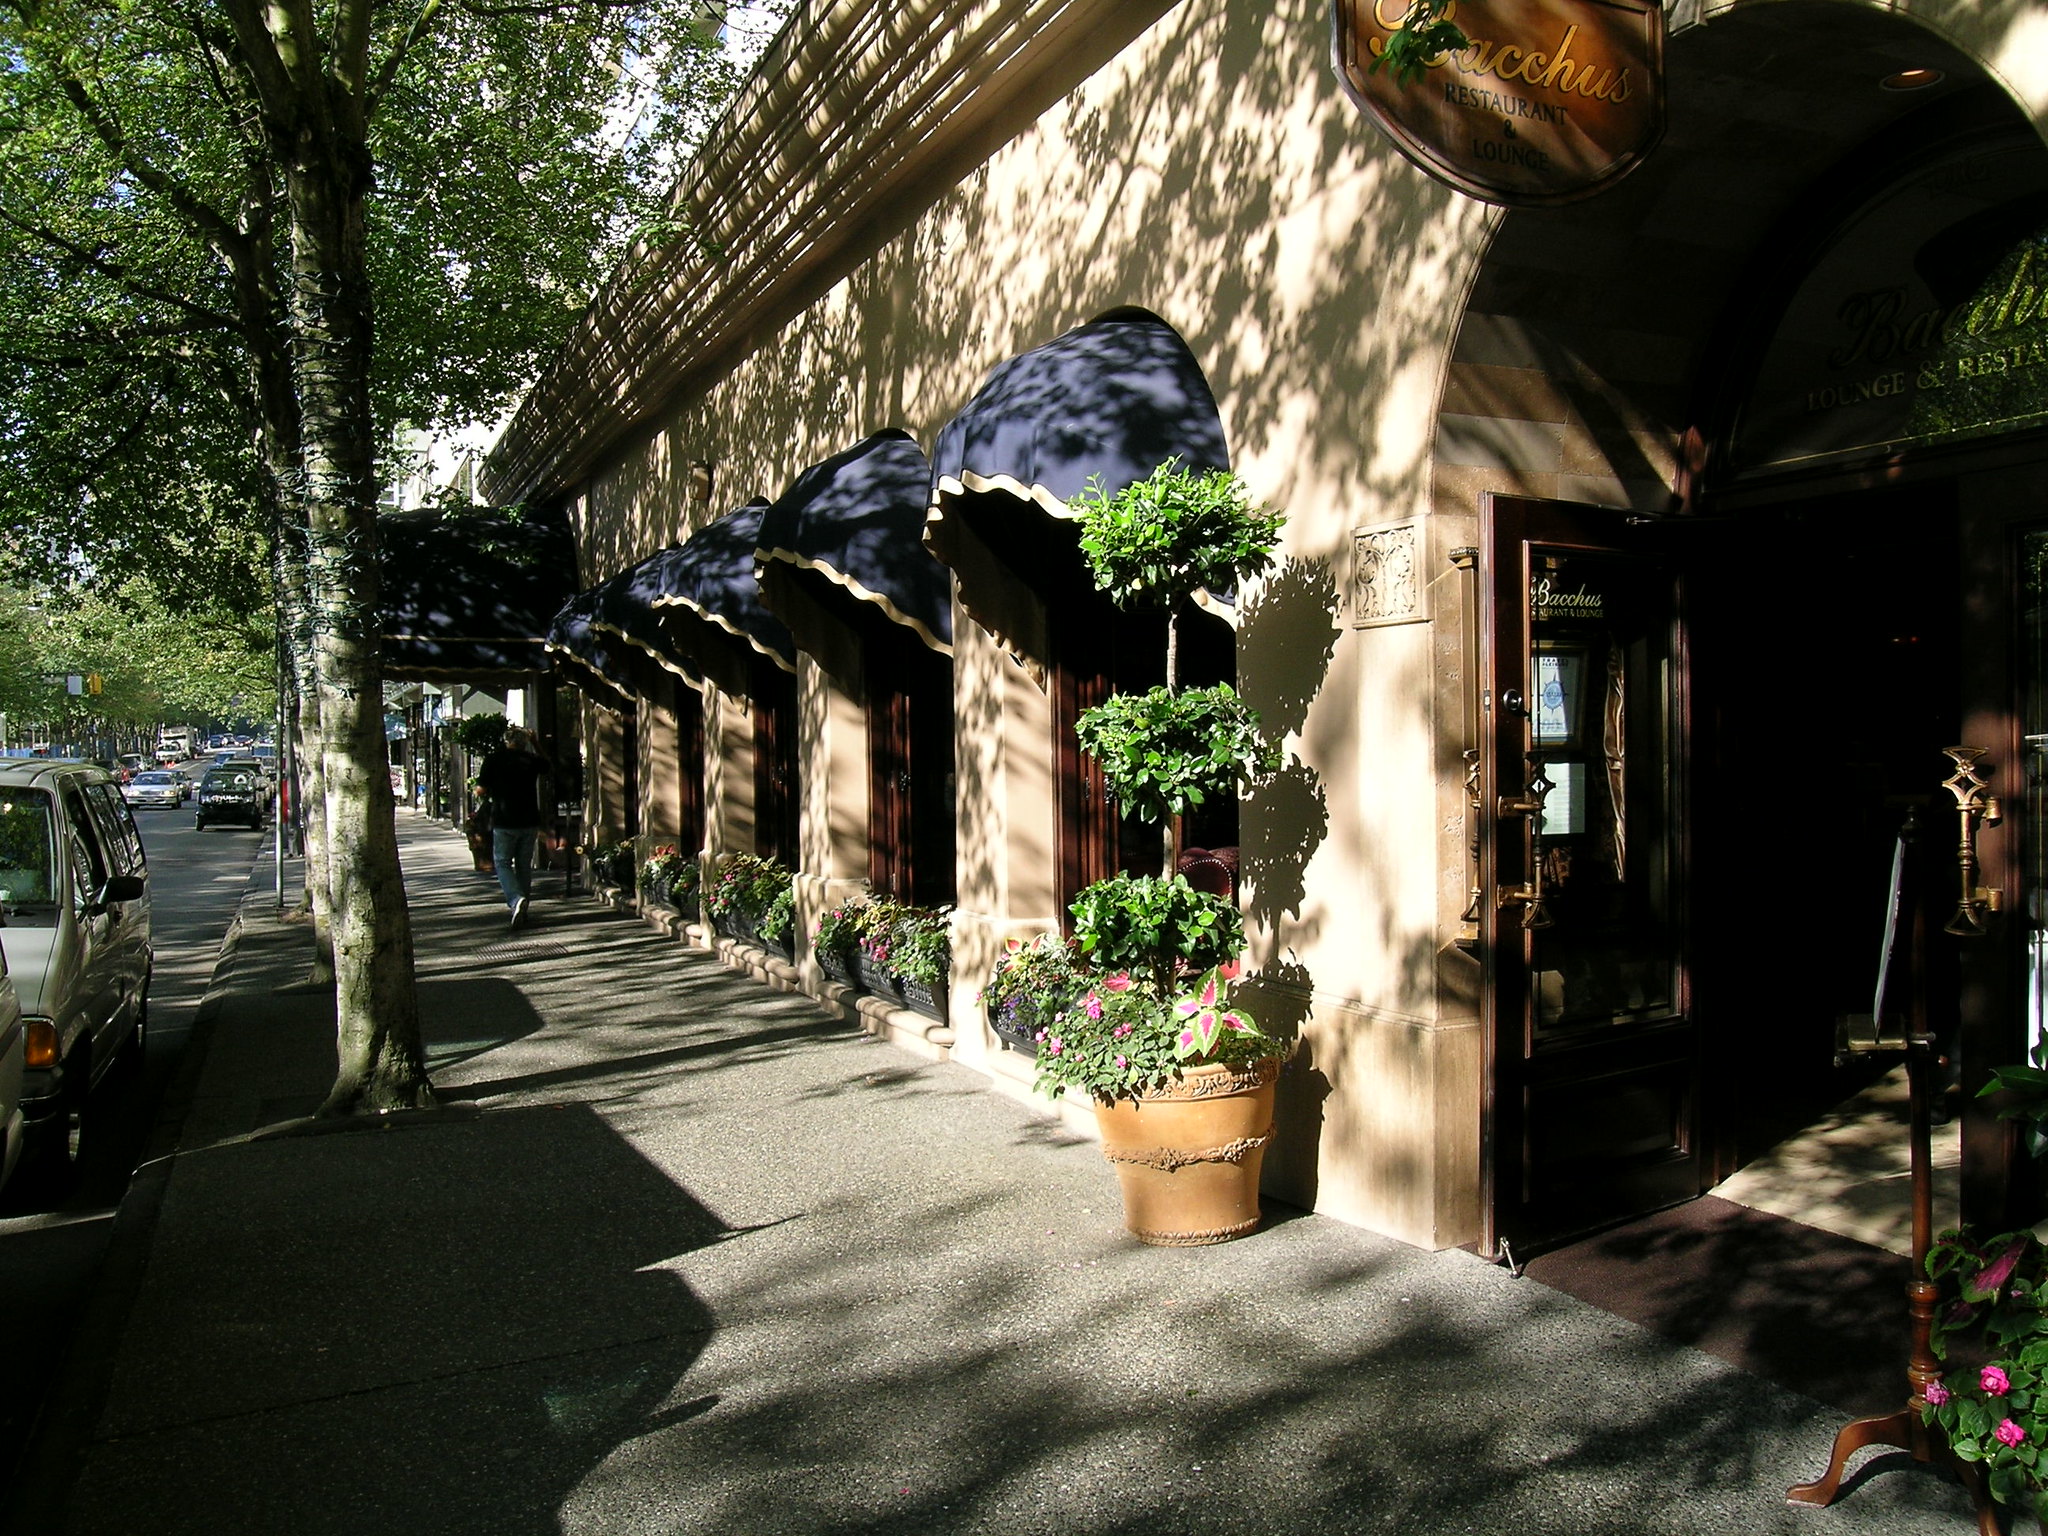 The entrance to a hotel restaurant called Bacchus, shaded by trees lining the street.